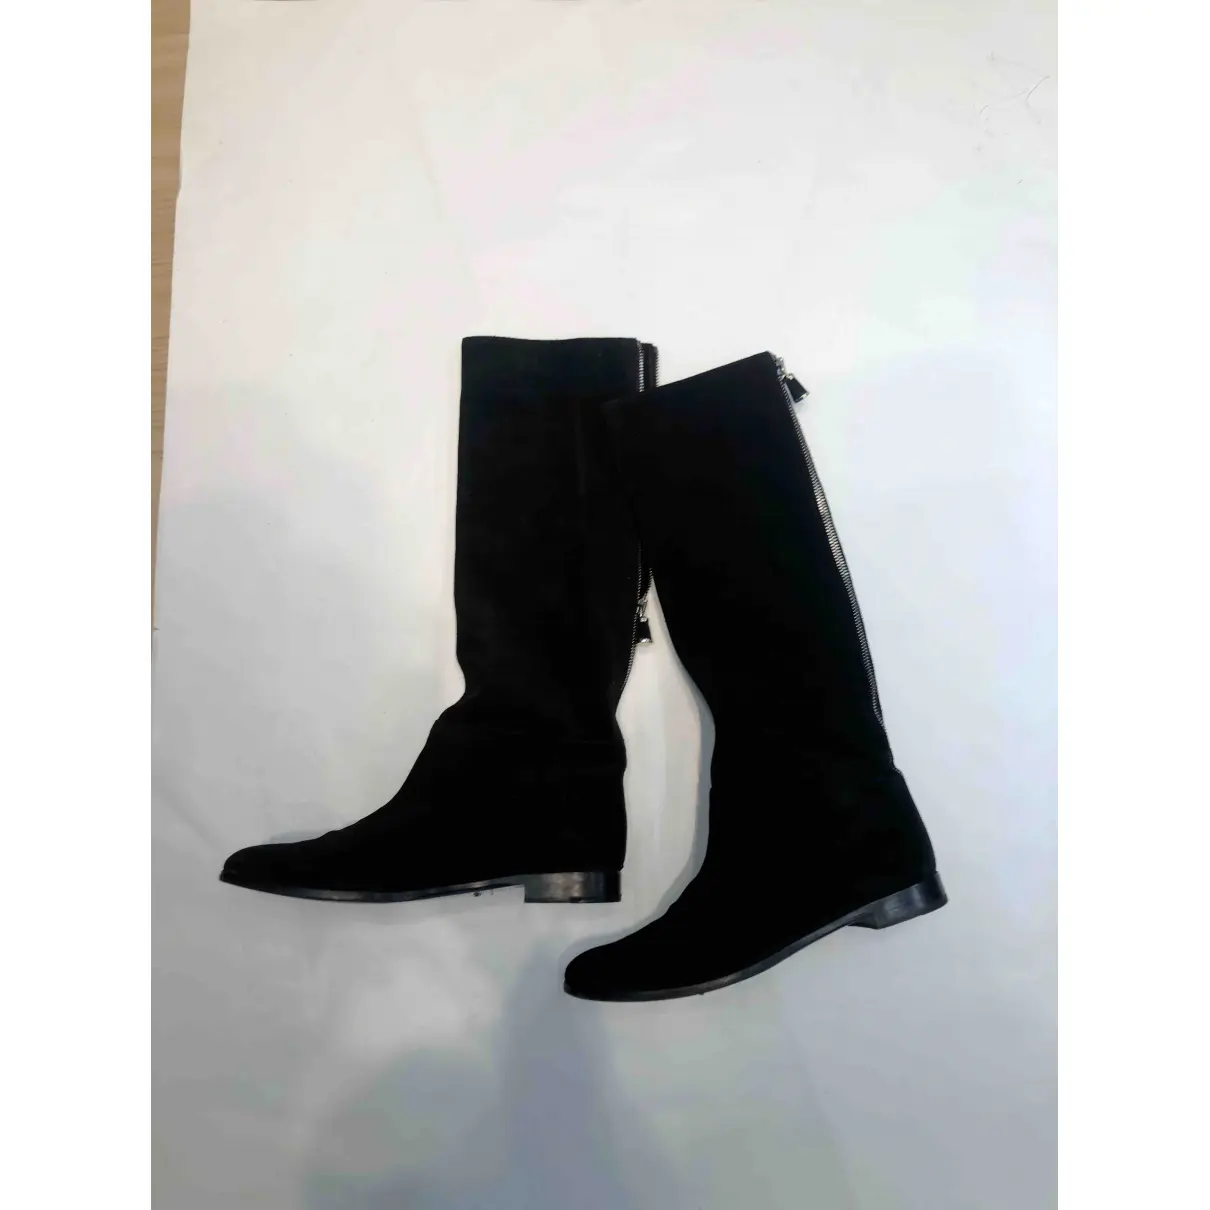 Buy Sergio Rossi Riding boots online